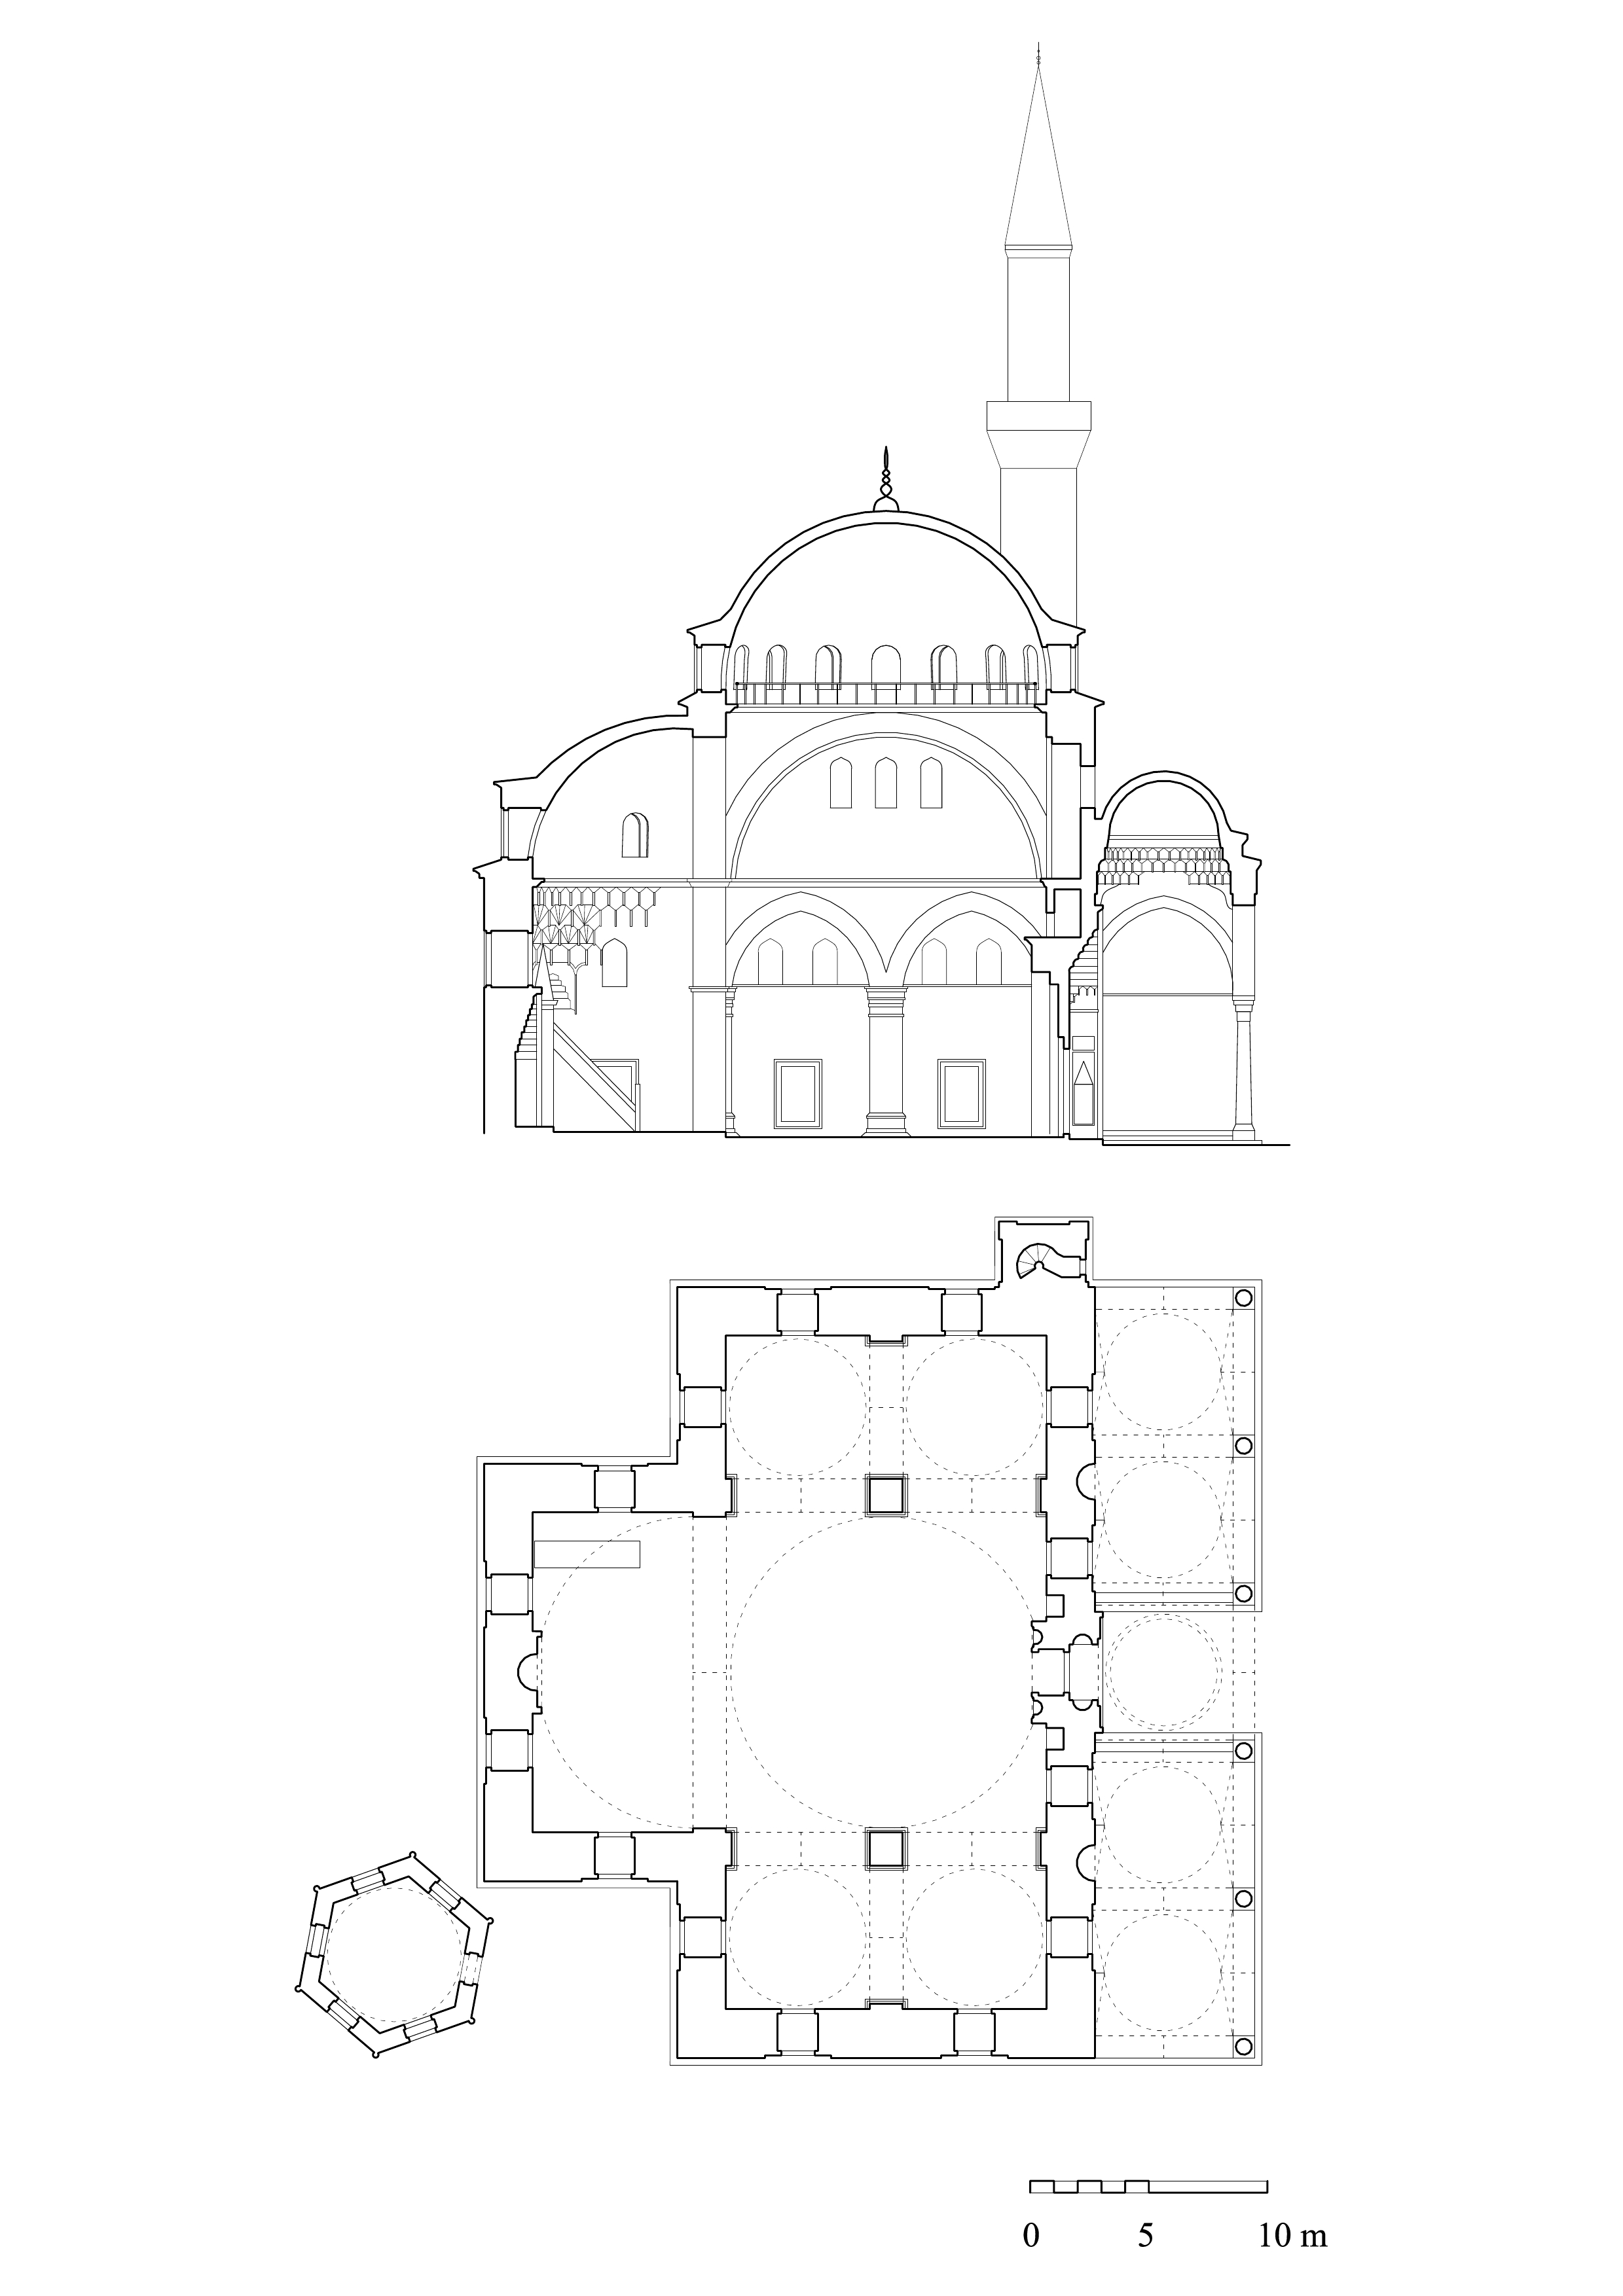 Floor plan of the mosque and mausoleum, and cross-section of mosque